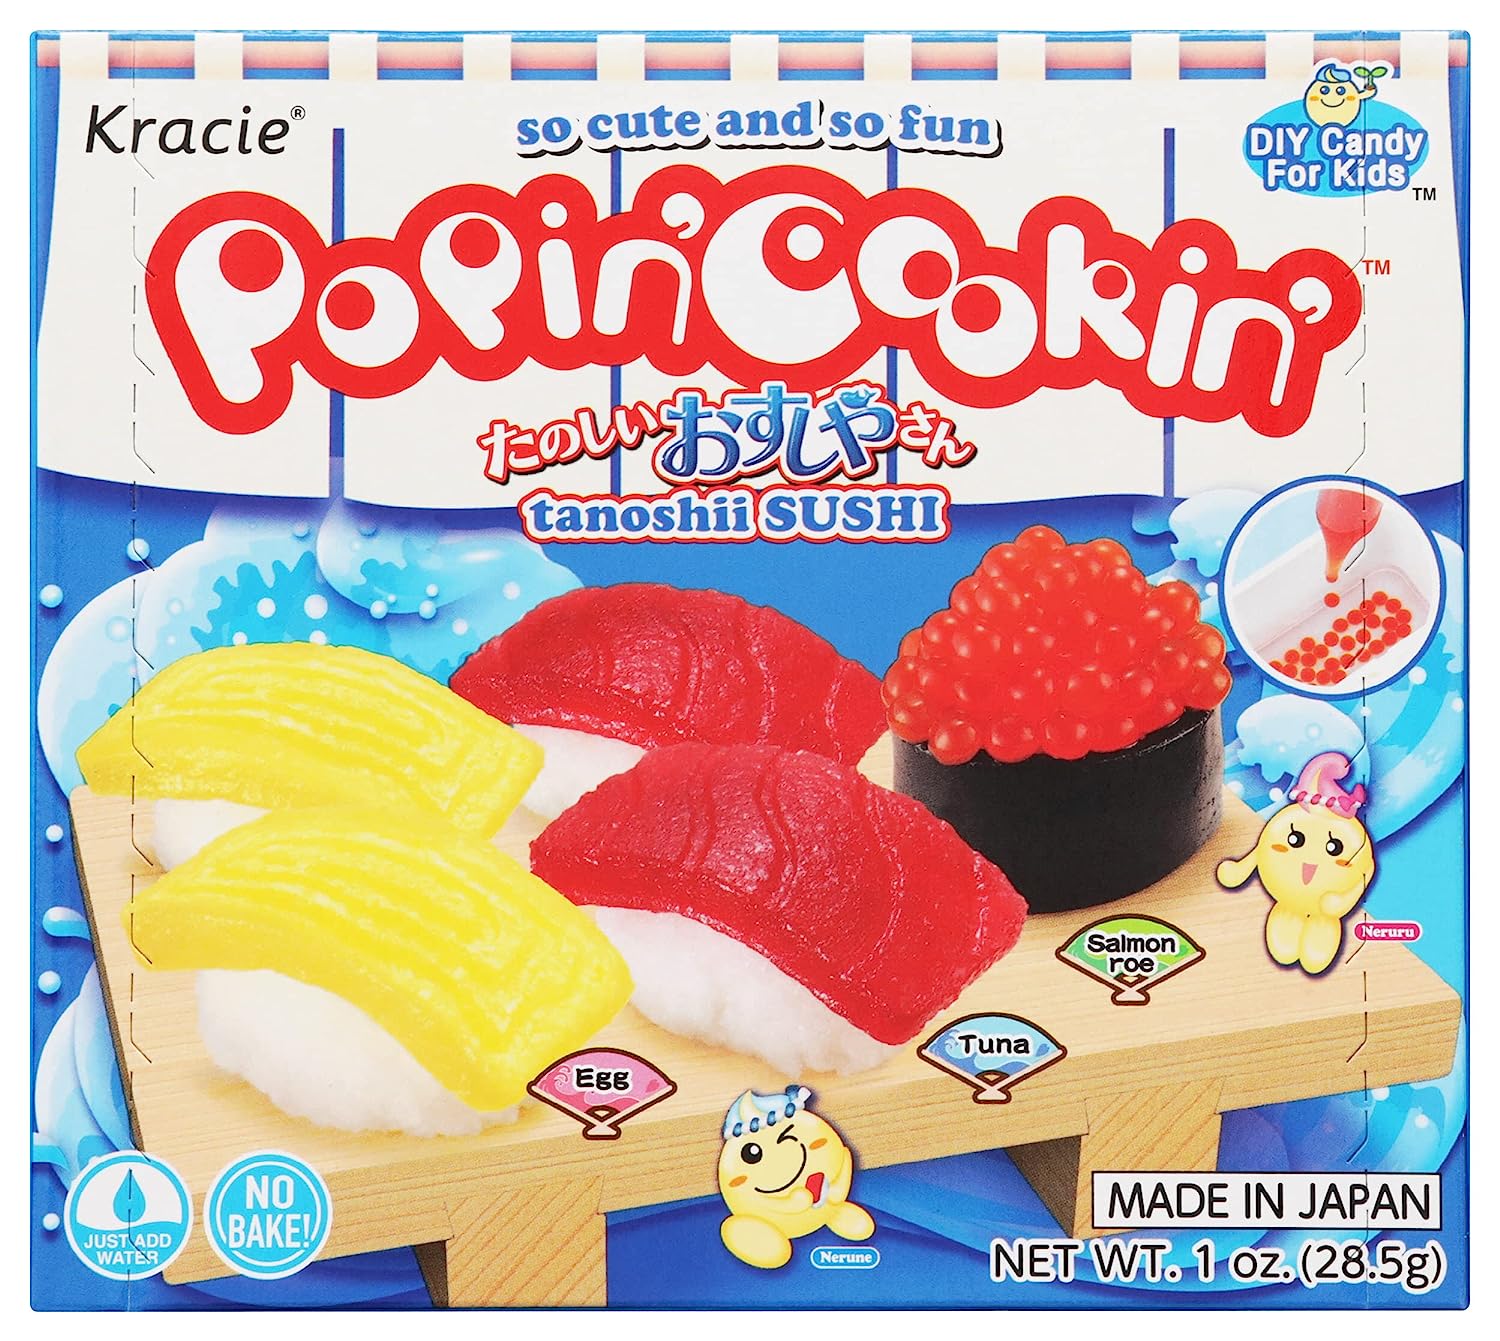 1-Oz Kracie Popin' Cookin' Diy Candy for Kids (Sushi Kit) $2.50 w/ S&S + Free Shipping w/ Prime or on orders over $35